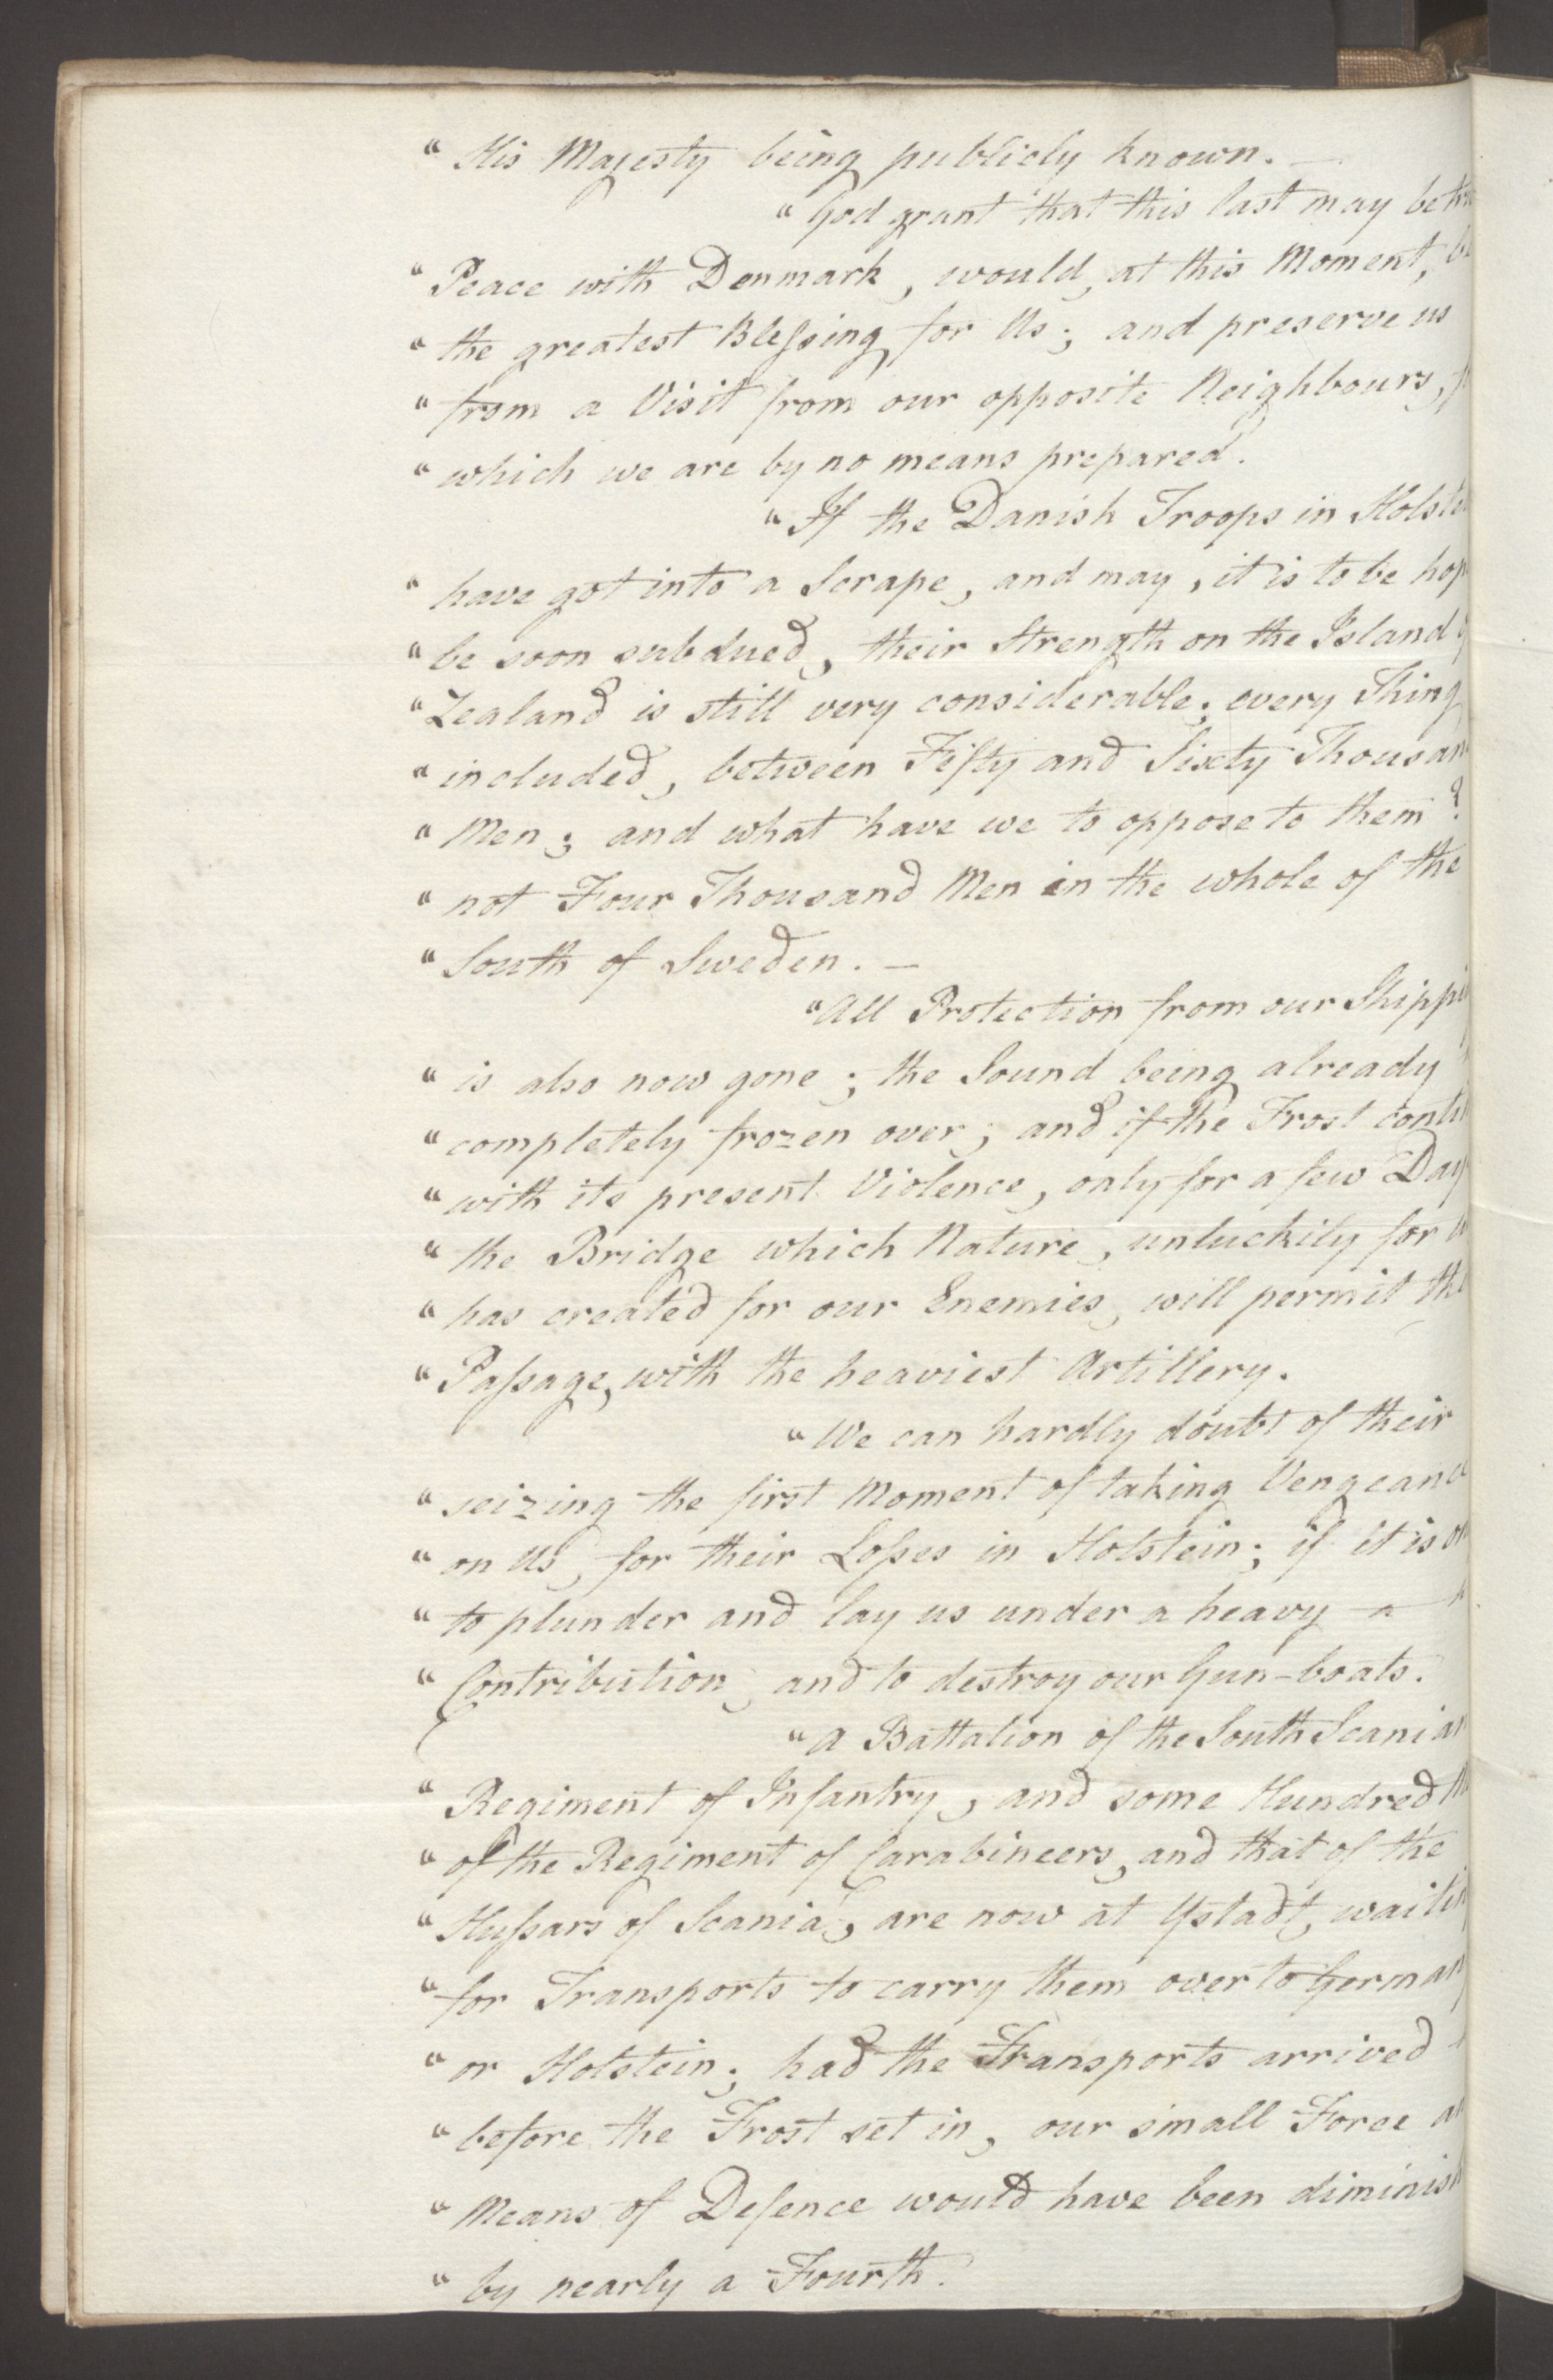 Foreign Office*, UKA/-/FO 38/16: Sir C. Gordon. Reports from Malmö, Jonkoping, and Helsingborg, 1814, p. 8